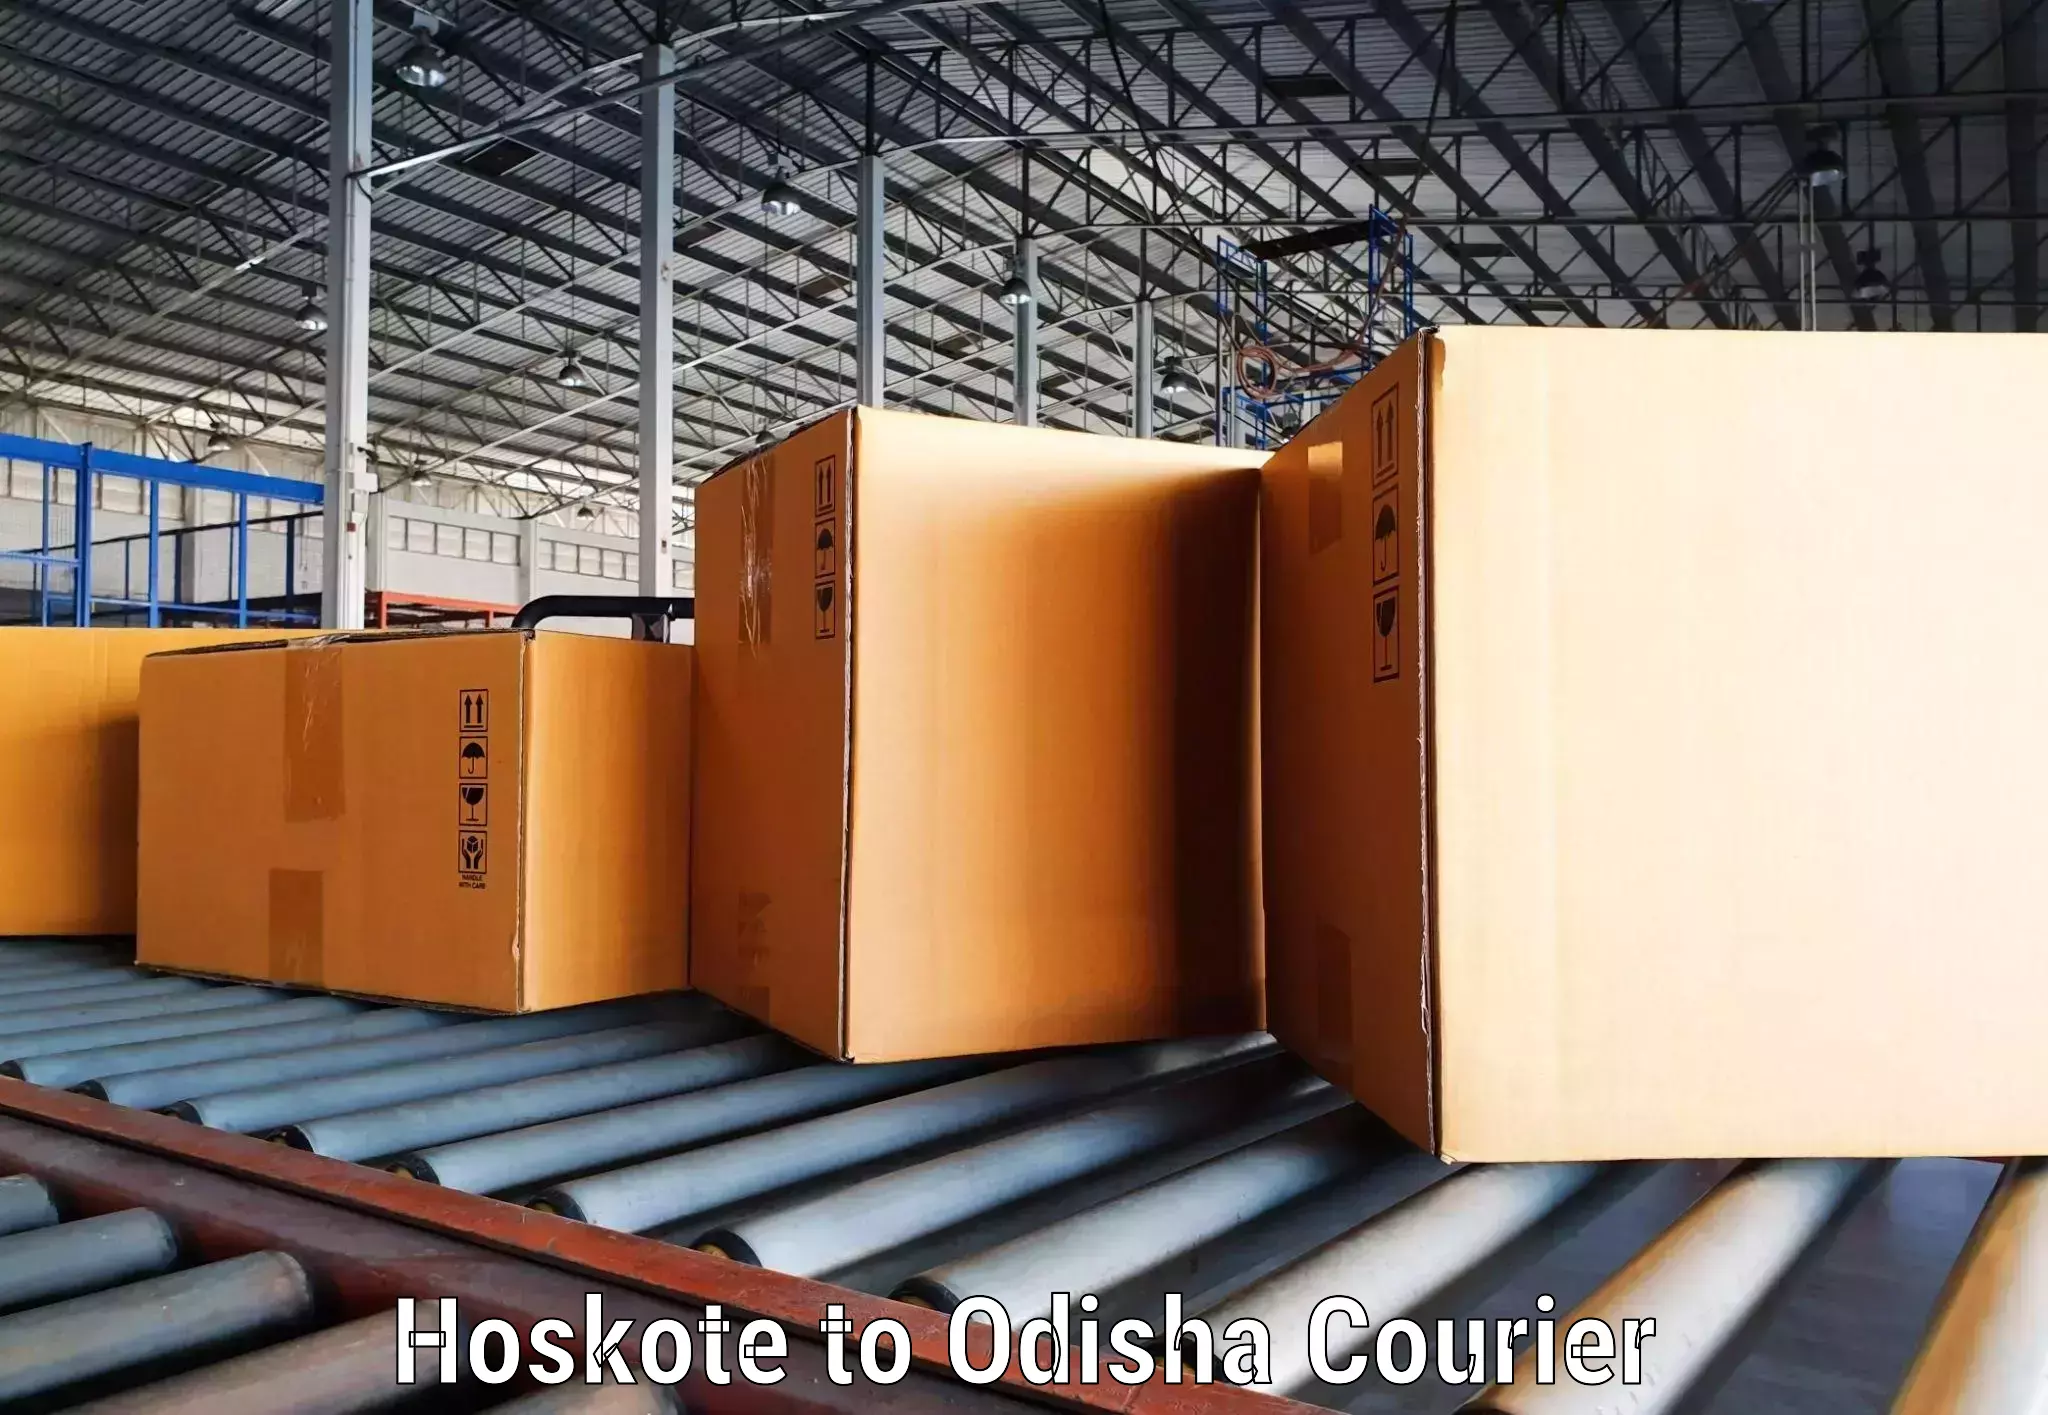 Global shipping networks Hoskote to Champua